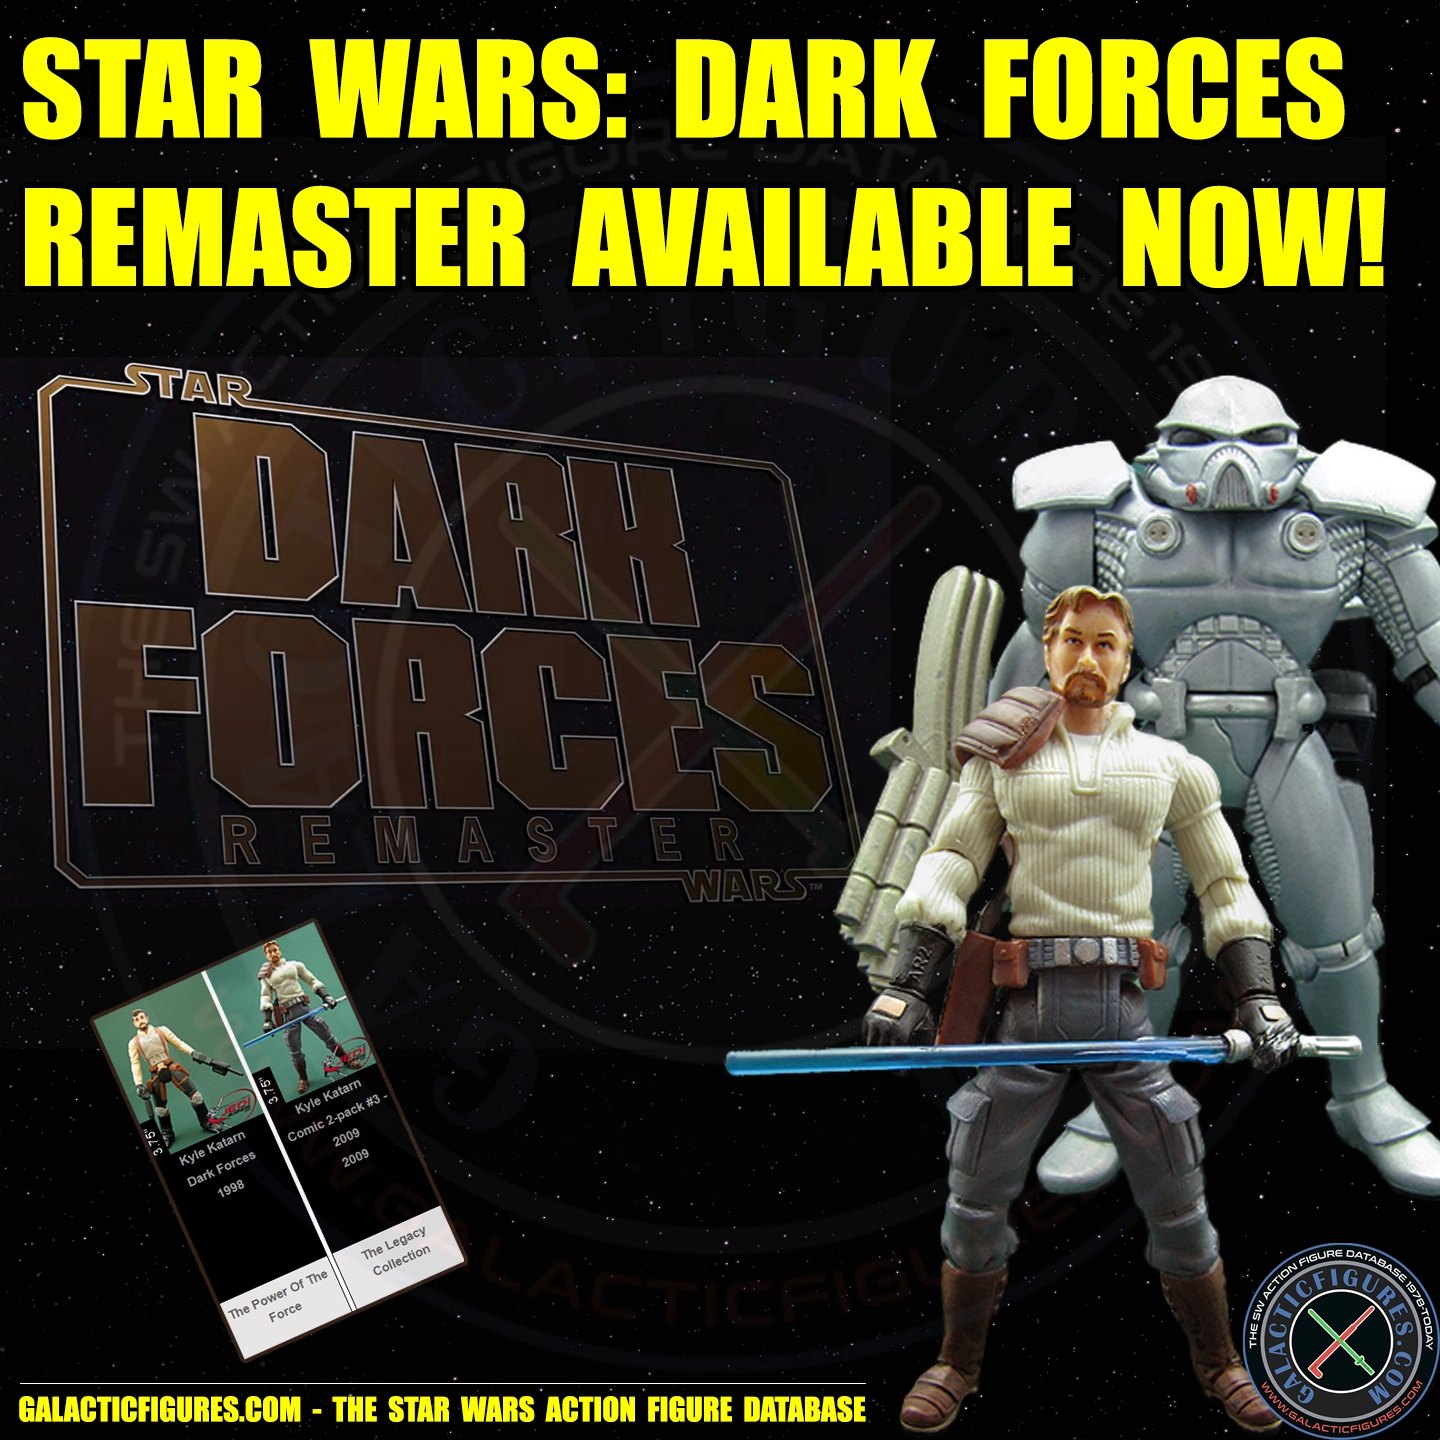 Star Wars: Dark Forces Remaster Out Now!